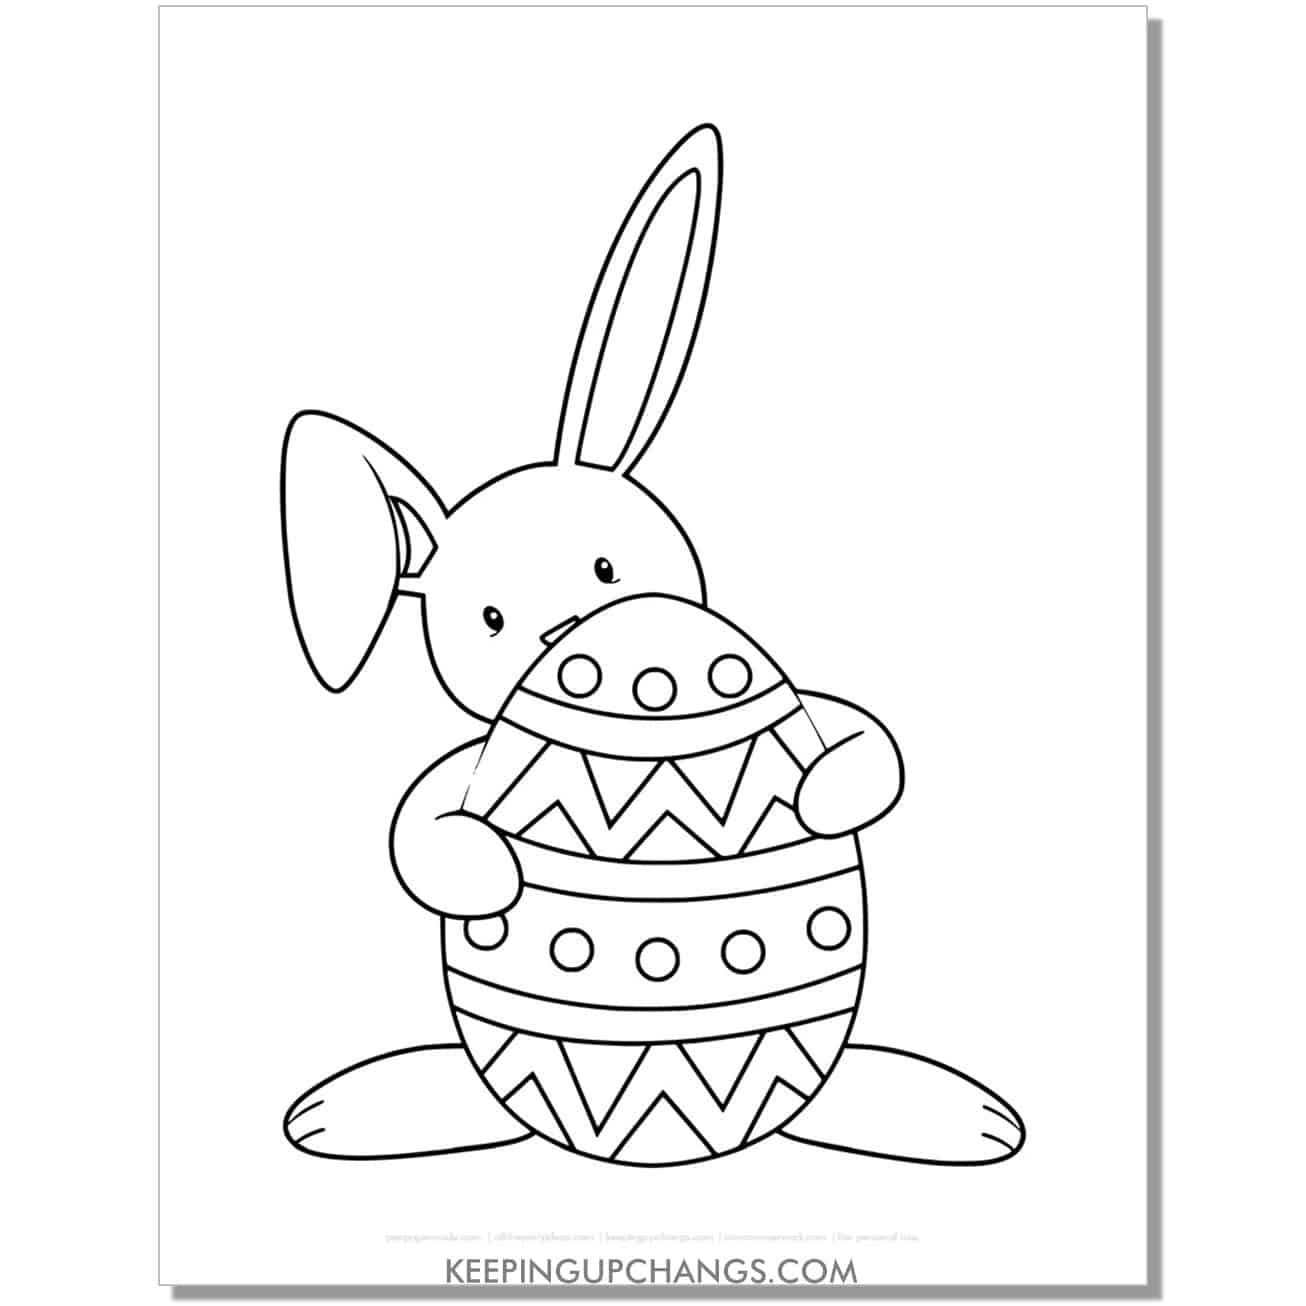 adorable easter bunny holding egg coloring page, sheet.